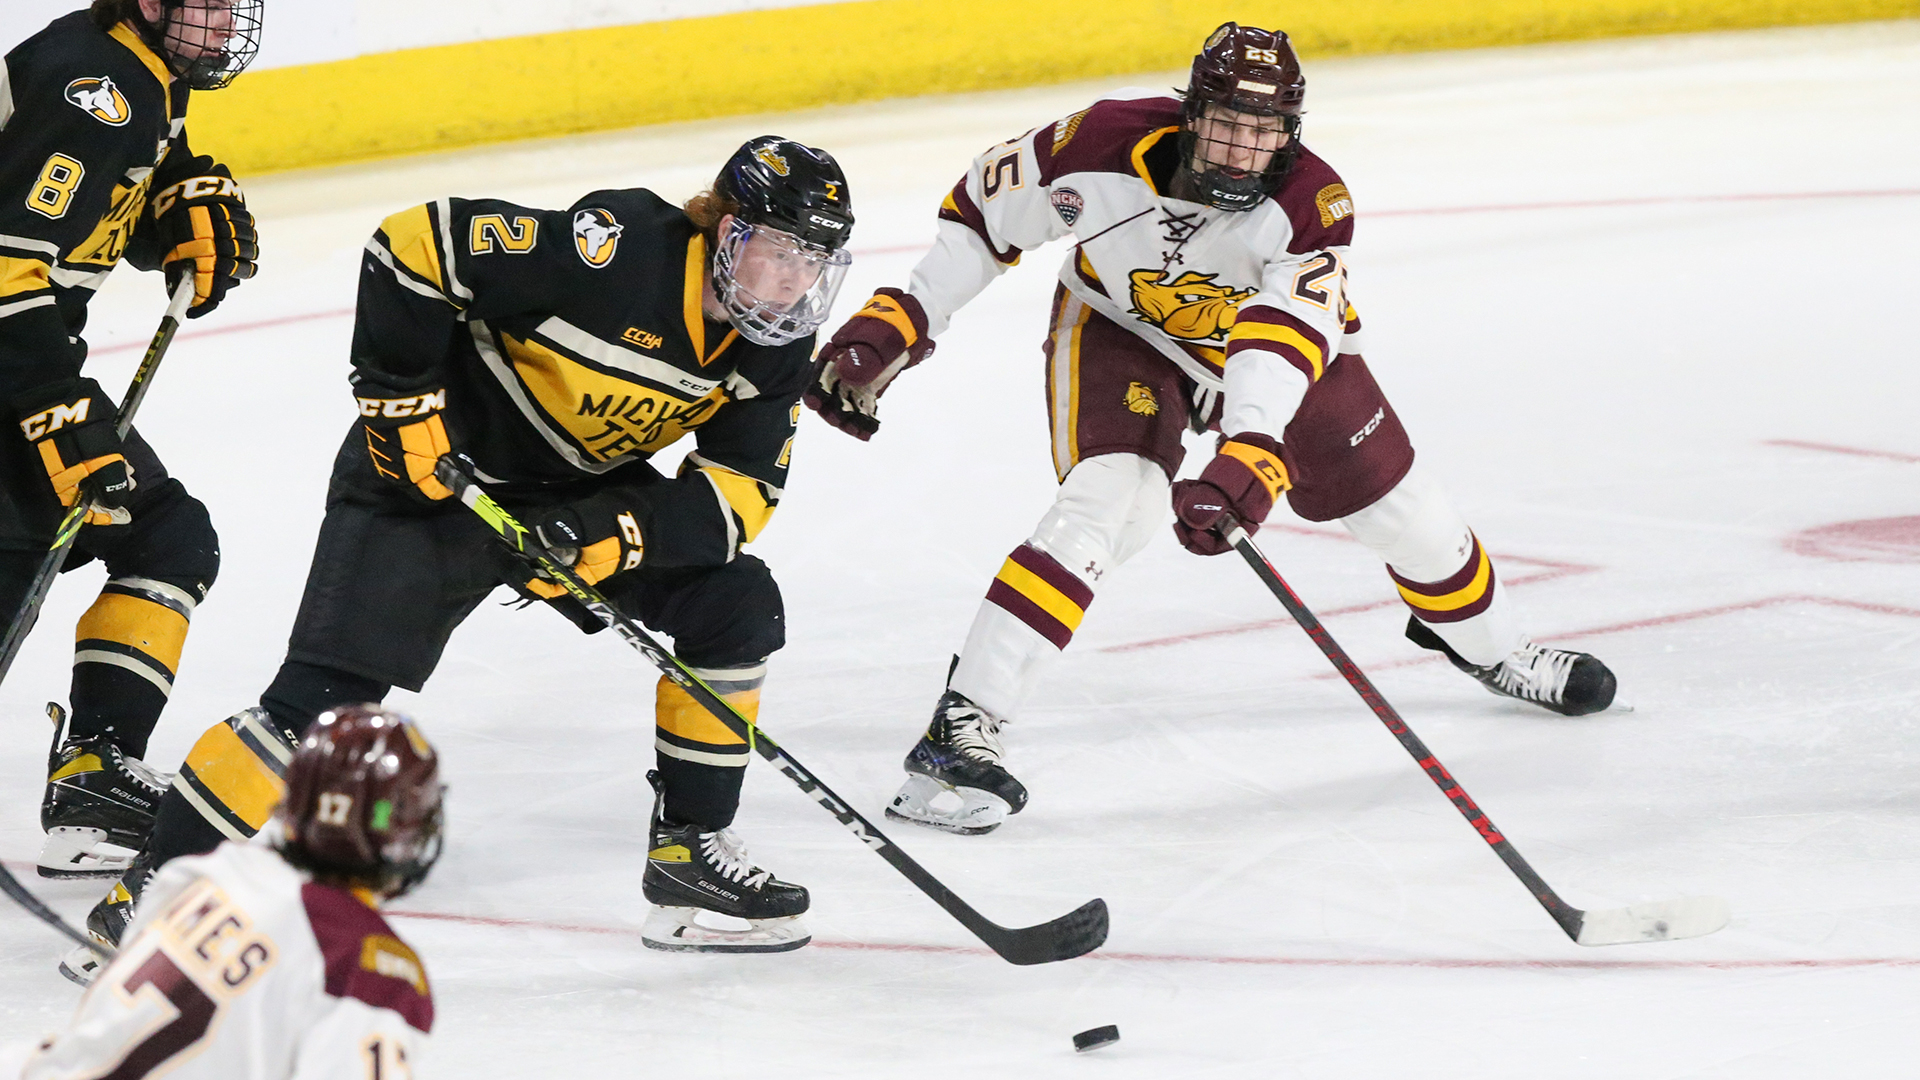 Tech's season ends with loss to UMD in NCAA Tournament